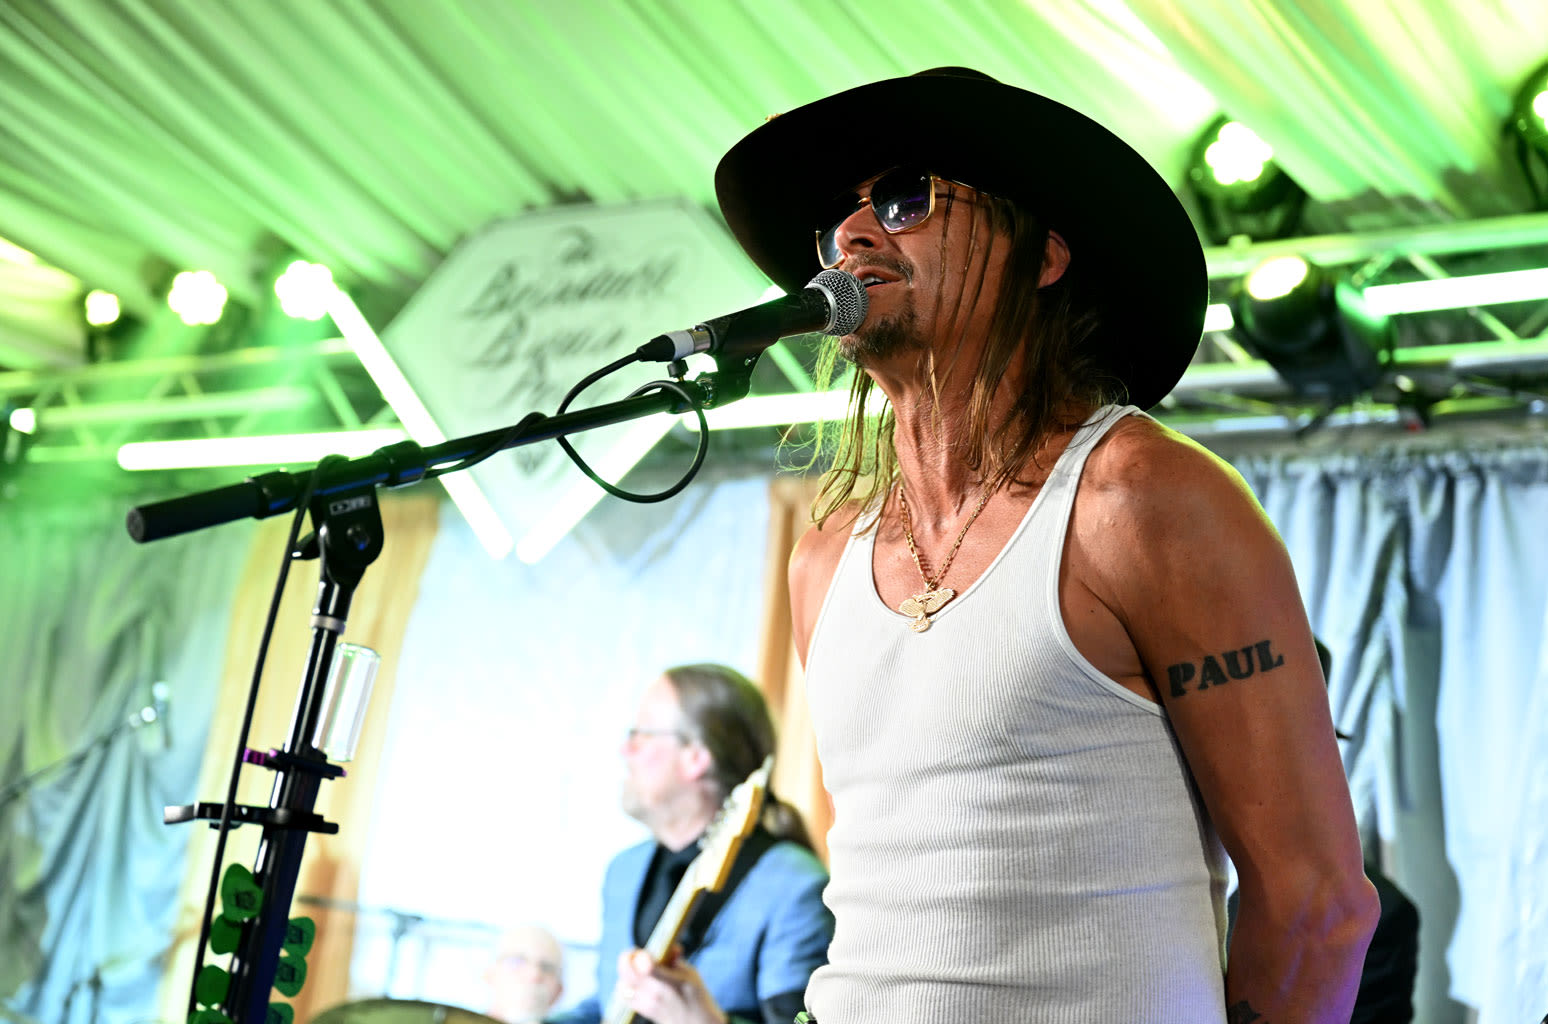 Kid Rock Reportedly Waves Gun During Interview, Uses Racial Slurs: ‘Write the Most Horrific Article About Me’